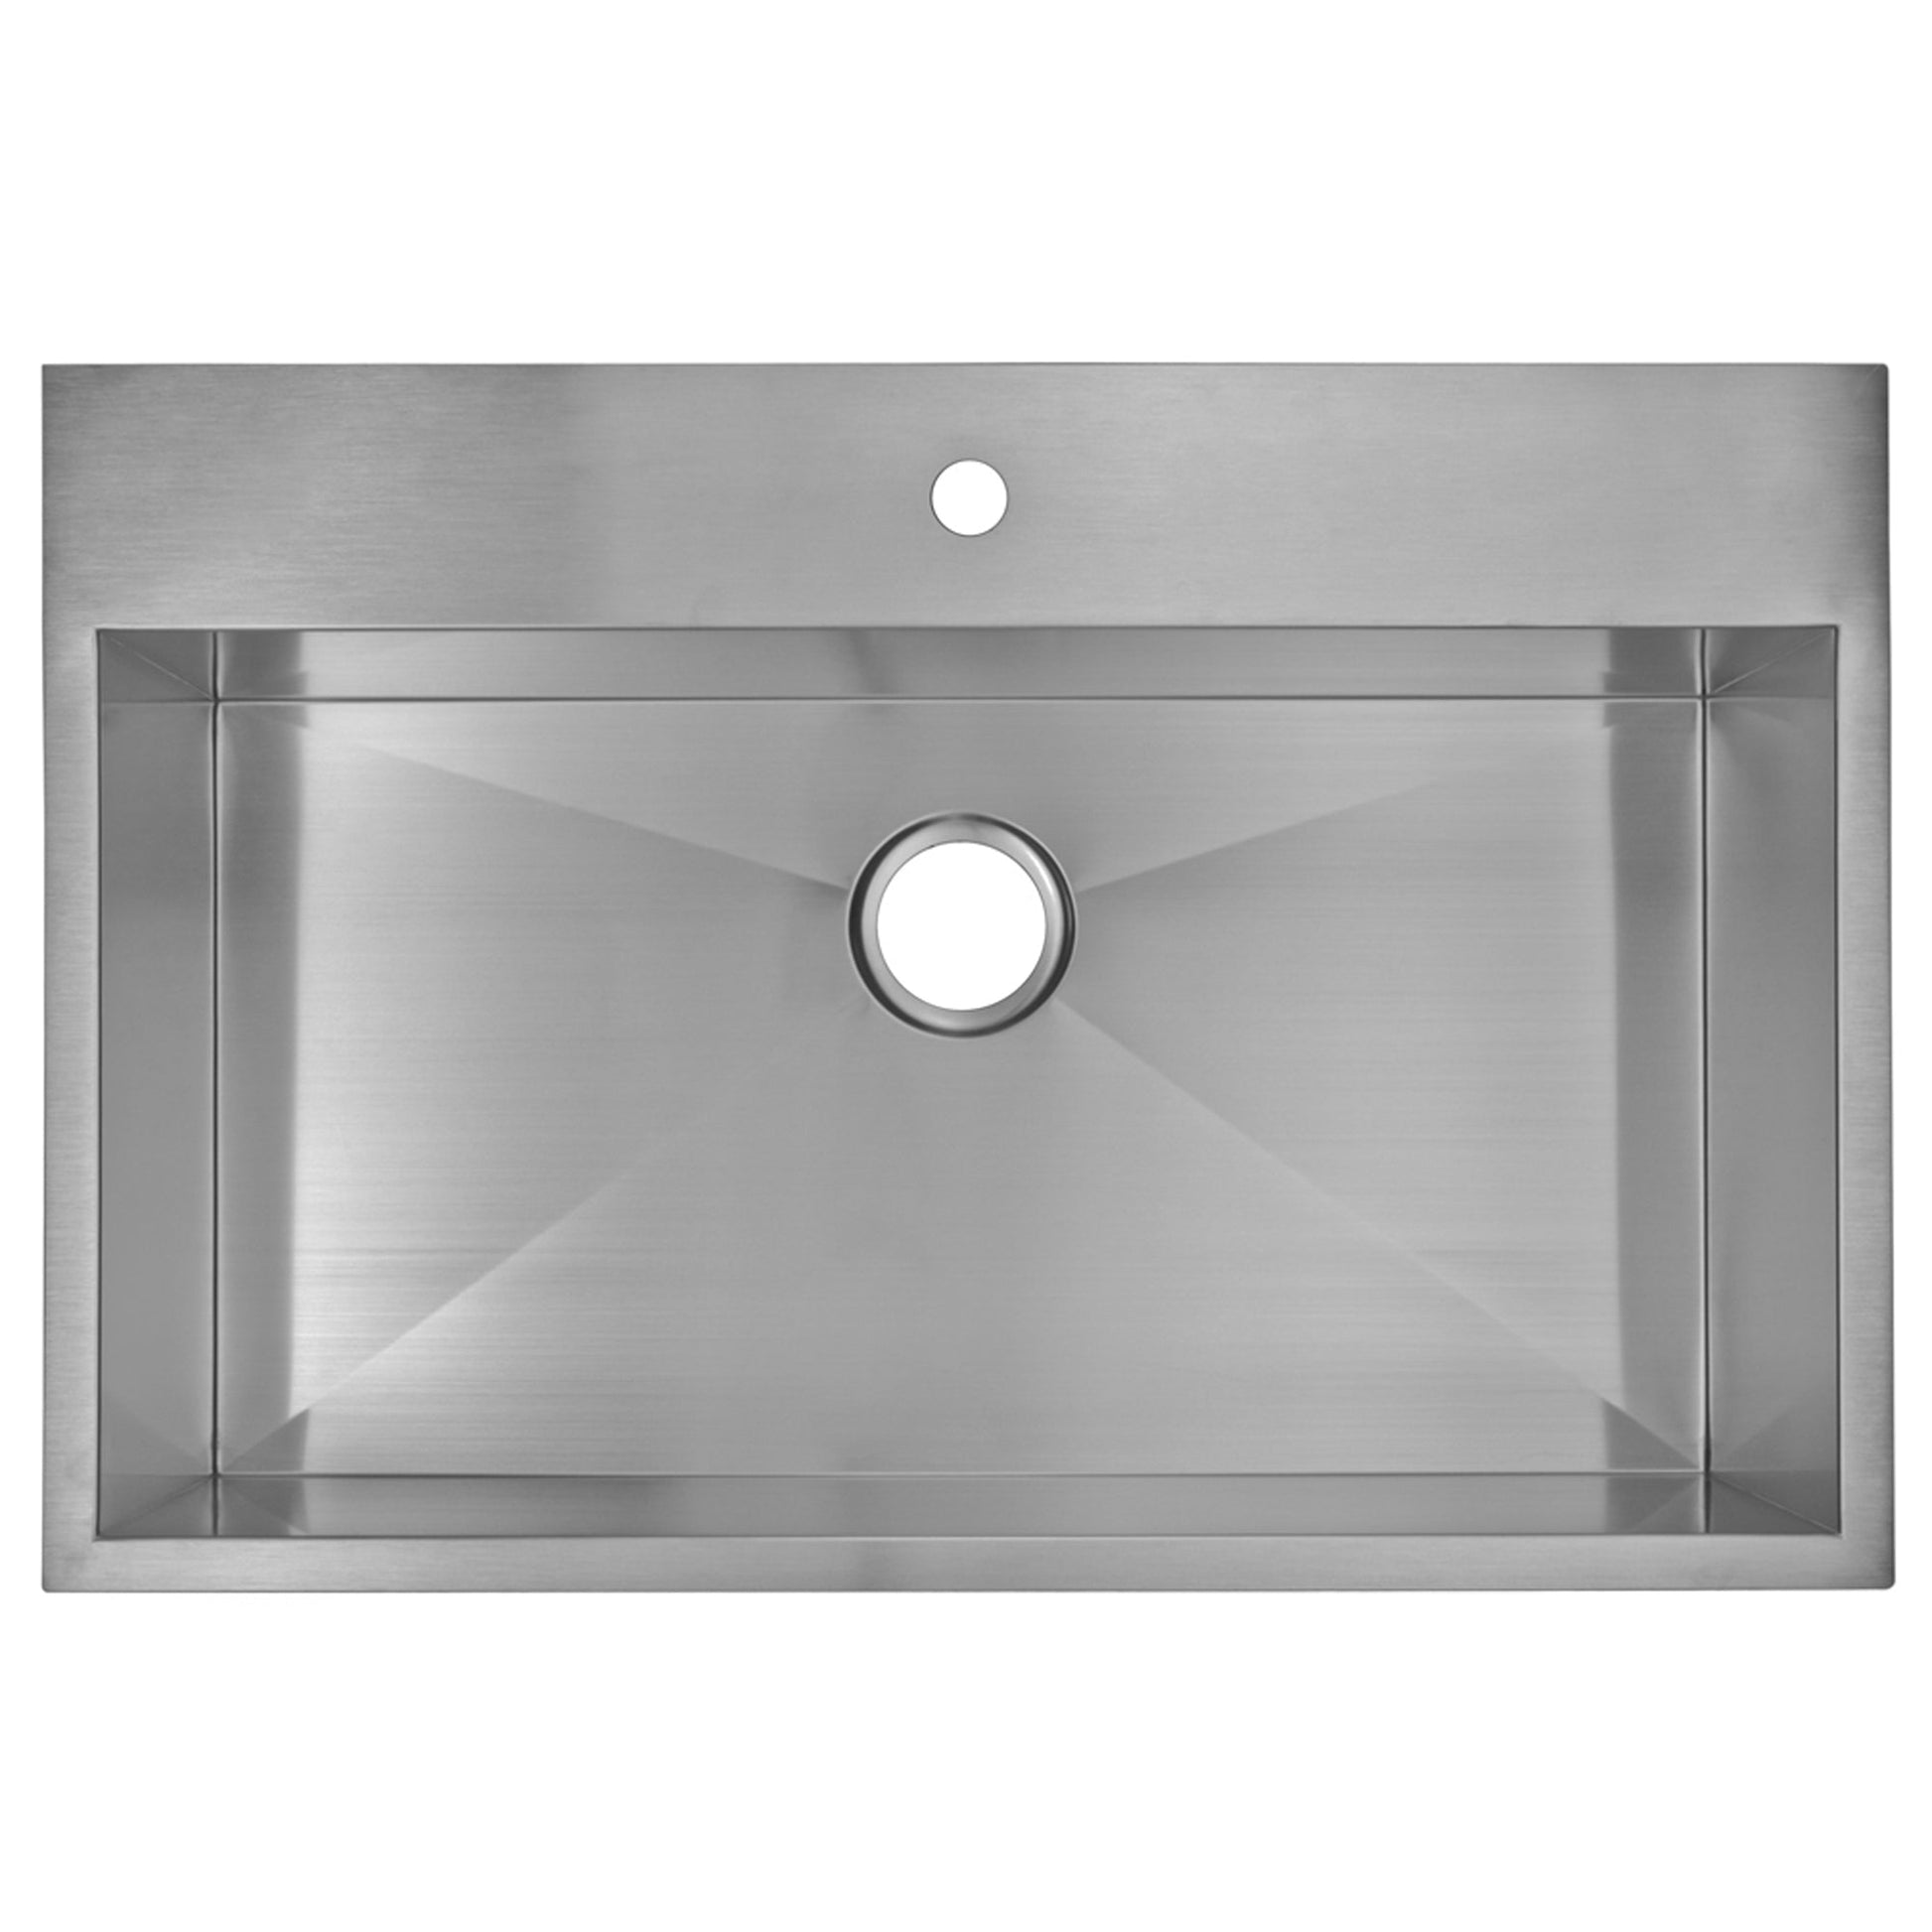 Water Creation Zero Radius Single Bowl Stainless Steel Hand Made Drop In 33 Inch X 22 Inch Sink With Drain And Strainer